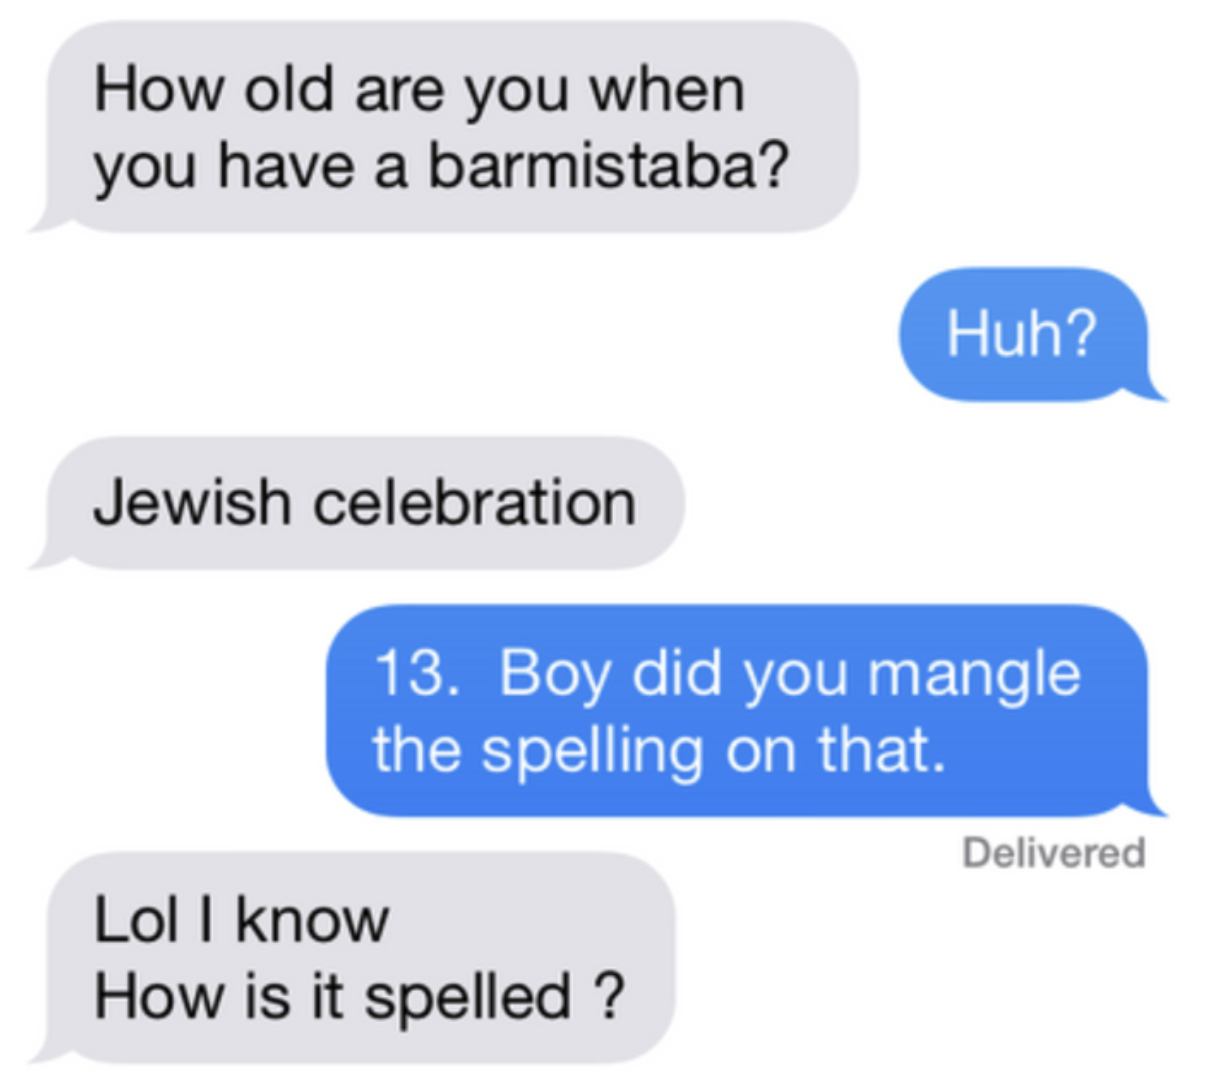 tweet saying how old are you when you have a barmistaba meaning barmixtzfah